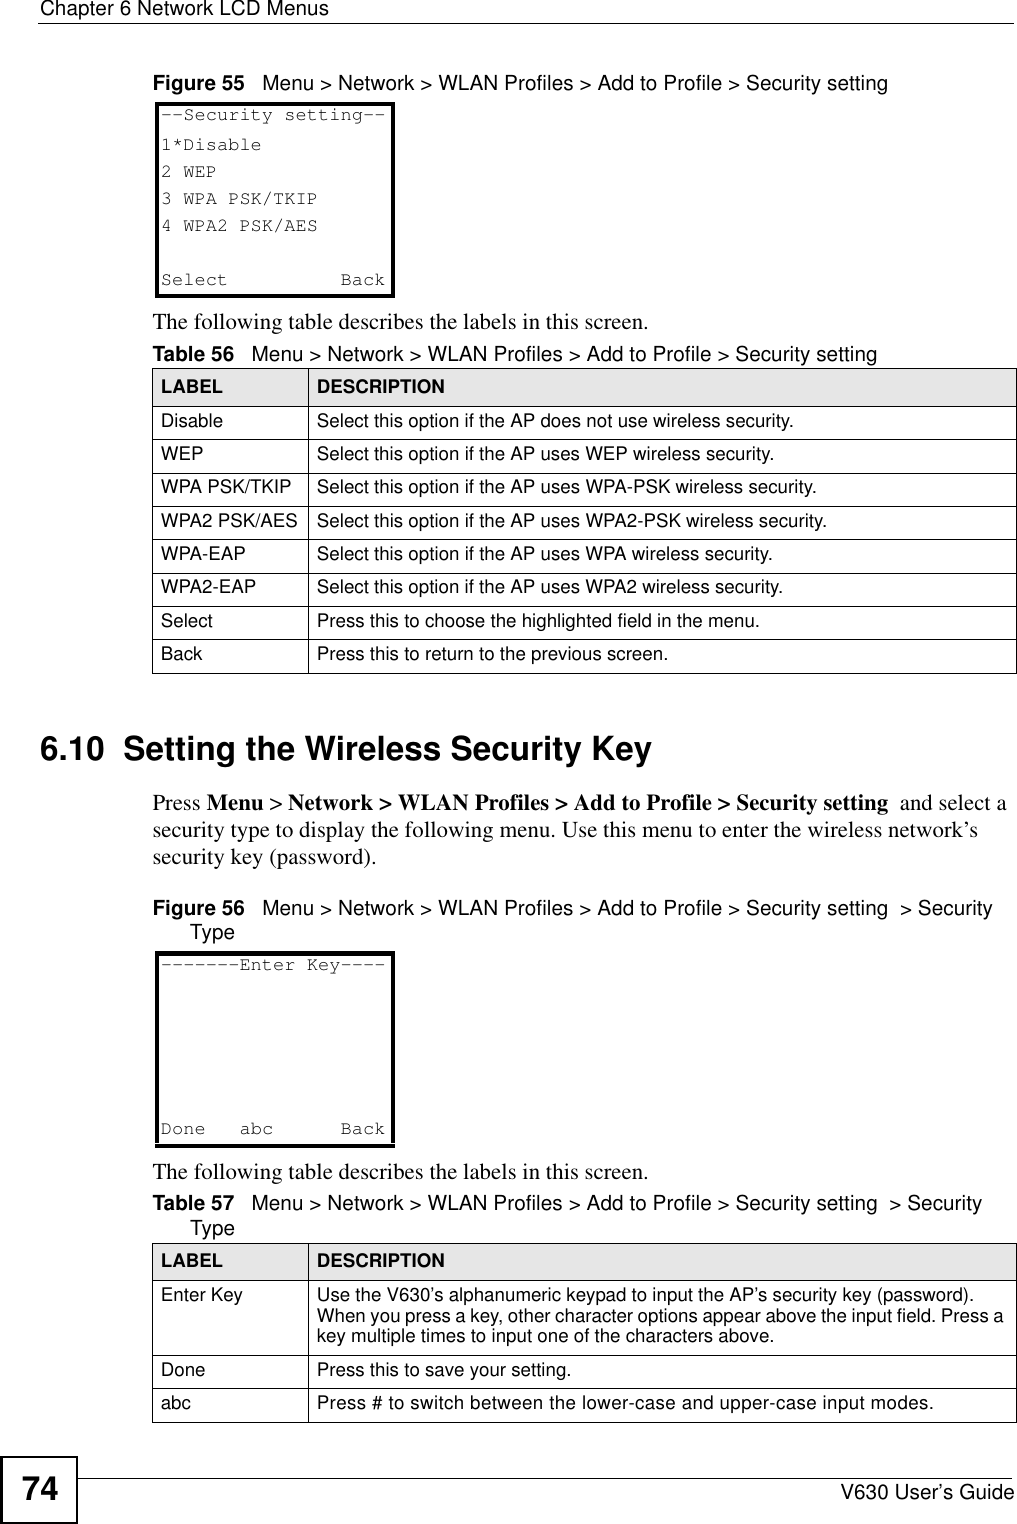 Chapter 6 Network LCD MenusV630 User’s Guide74Figure 55   Menu &gt; Network &gt; WLAN Profiles &gt; Add to Profile &gt; Security settingThe following table describes the labels in this screen.6.10  Setting the Wireless Security KeyPress Menu &gt; Network &gt; WLAN Profiles &gt; Add to Profile &gt; Security setting  and select a security type to display the following menu. Use this menu to enter the wireless network’s security key (password).Figure 56   Menu &gt; Network &gt; WLAN Profiles &gt; Add to Profile &gt; Security setting  &gt; Security TypeThe following table describes the labels in this screen.Table 56   Menu &gt; Network &gt; WLAN Profiles &gt; Add to Profile &gt; Security settingLABEL DESCRIPTIONDisable Select this option if the AP does not use wireless security.WEP Select this option if the AP uses WEP wireless security.WPA PSK/TKIP Select this option if the AP uses WPA-PSK wireless security.WPA2 PSK/AES Select this option if the AP uses WPA2-PSK wireless security.WPA-EAP Select this option if the AP uses WPA wireless security.WPA2-EAP Select this option if the AP uses WPA2 wireless security.Select Press this to choose the highlighted field in the menu.Back Press this to return to the previous screen.--Security setting--1*Disable2 WEP3 WPA PSK/TKIP4 WPA2 PSK/AESSelect   BackTable 57   Menu &gt; Network &gt; WLAN Profiles &gt; Add to Profile &gt; Security setting  &gt; Security TypeLABEL DESCRIPTIONEnter Key Use the V630’s alphanumeric keypad to input the AP’s security key (password). When you press a key, other character options appear above the input field. Press a key multiple times to input one of the characters above.Done Press this to save your setting. abc Press # to switch between the lower-case and upper-case input modes. -------Enter Key----Done abc   Back